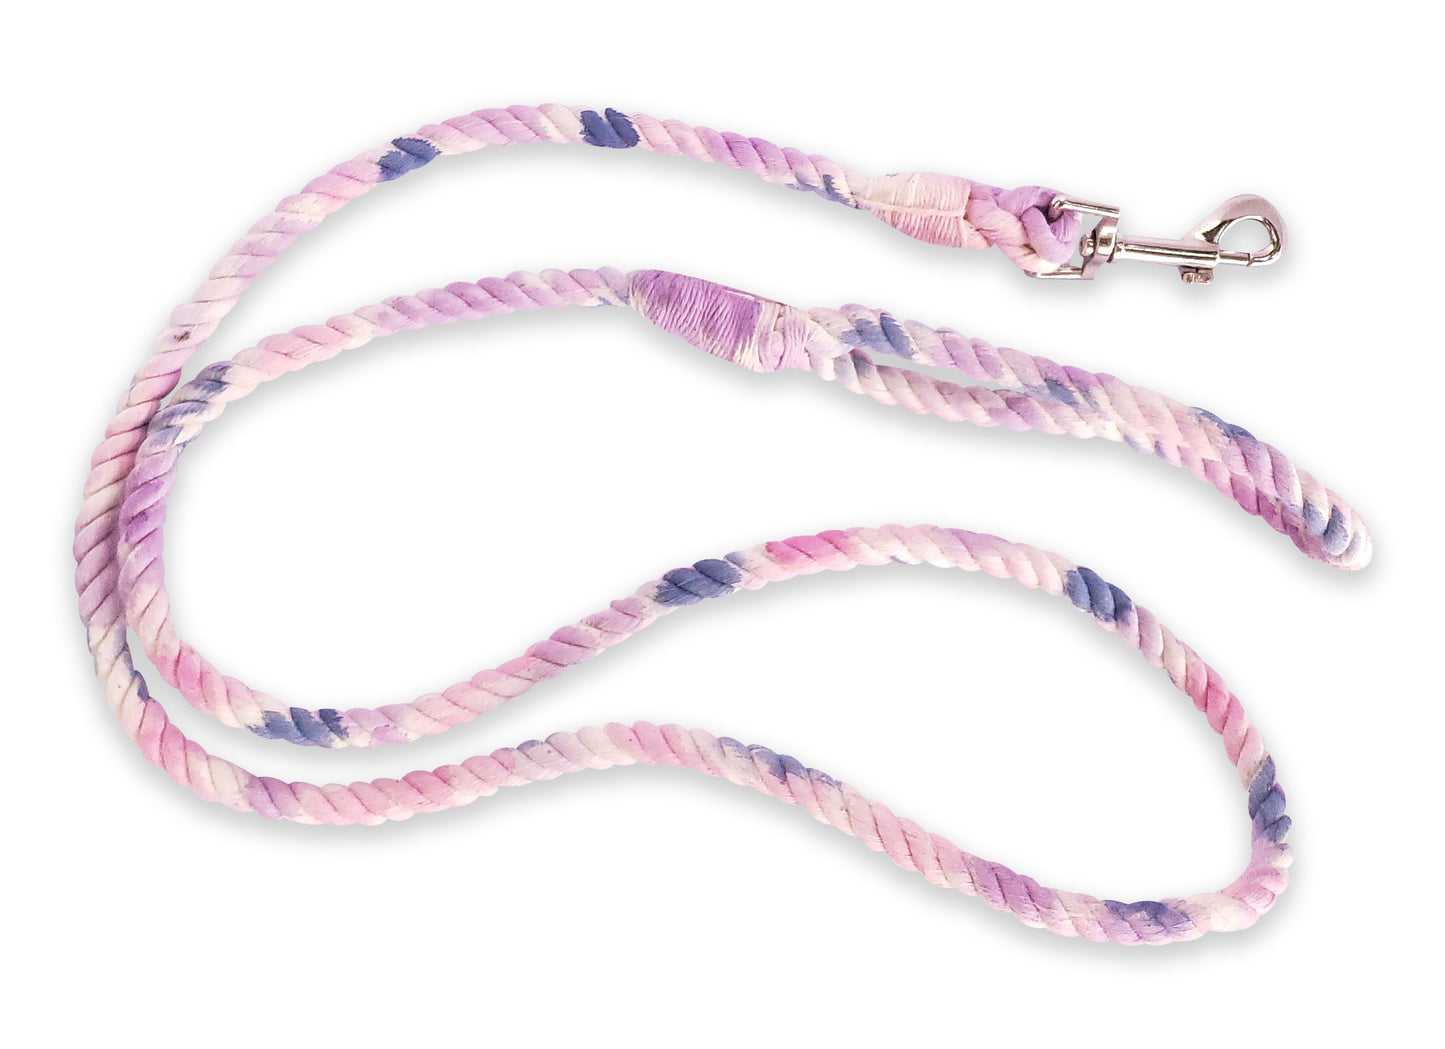 Extra Long 100% Cotton Rope Leash, Splatter Dyed Pet Play Leash